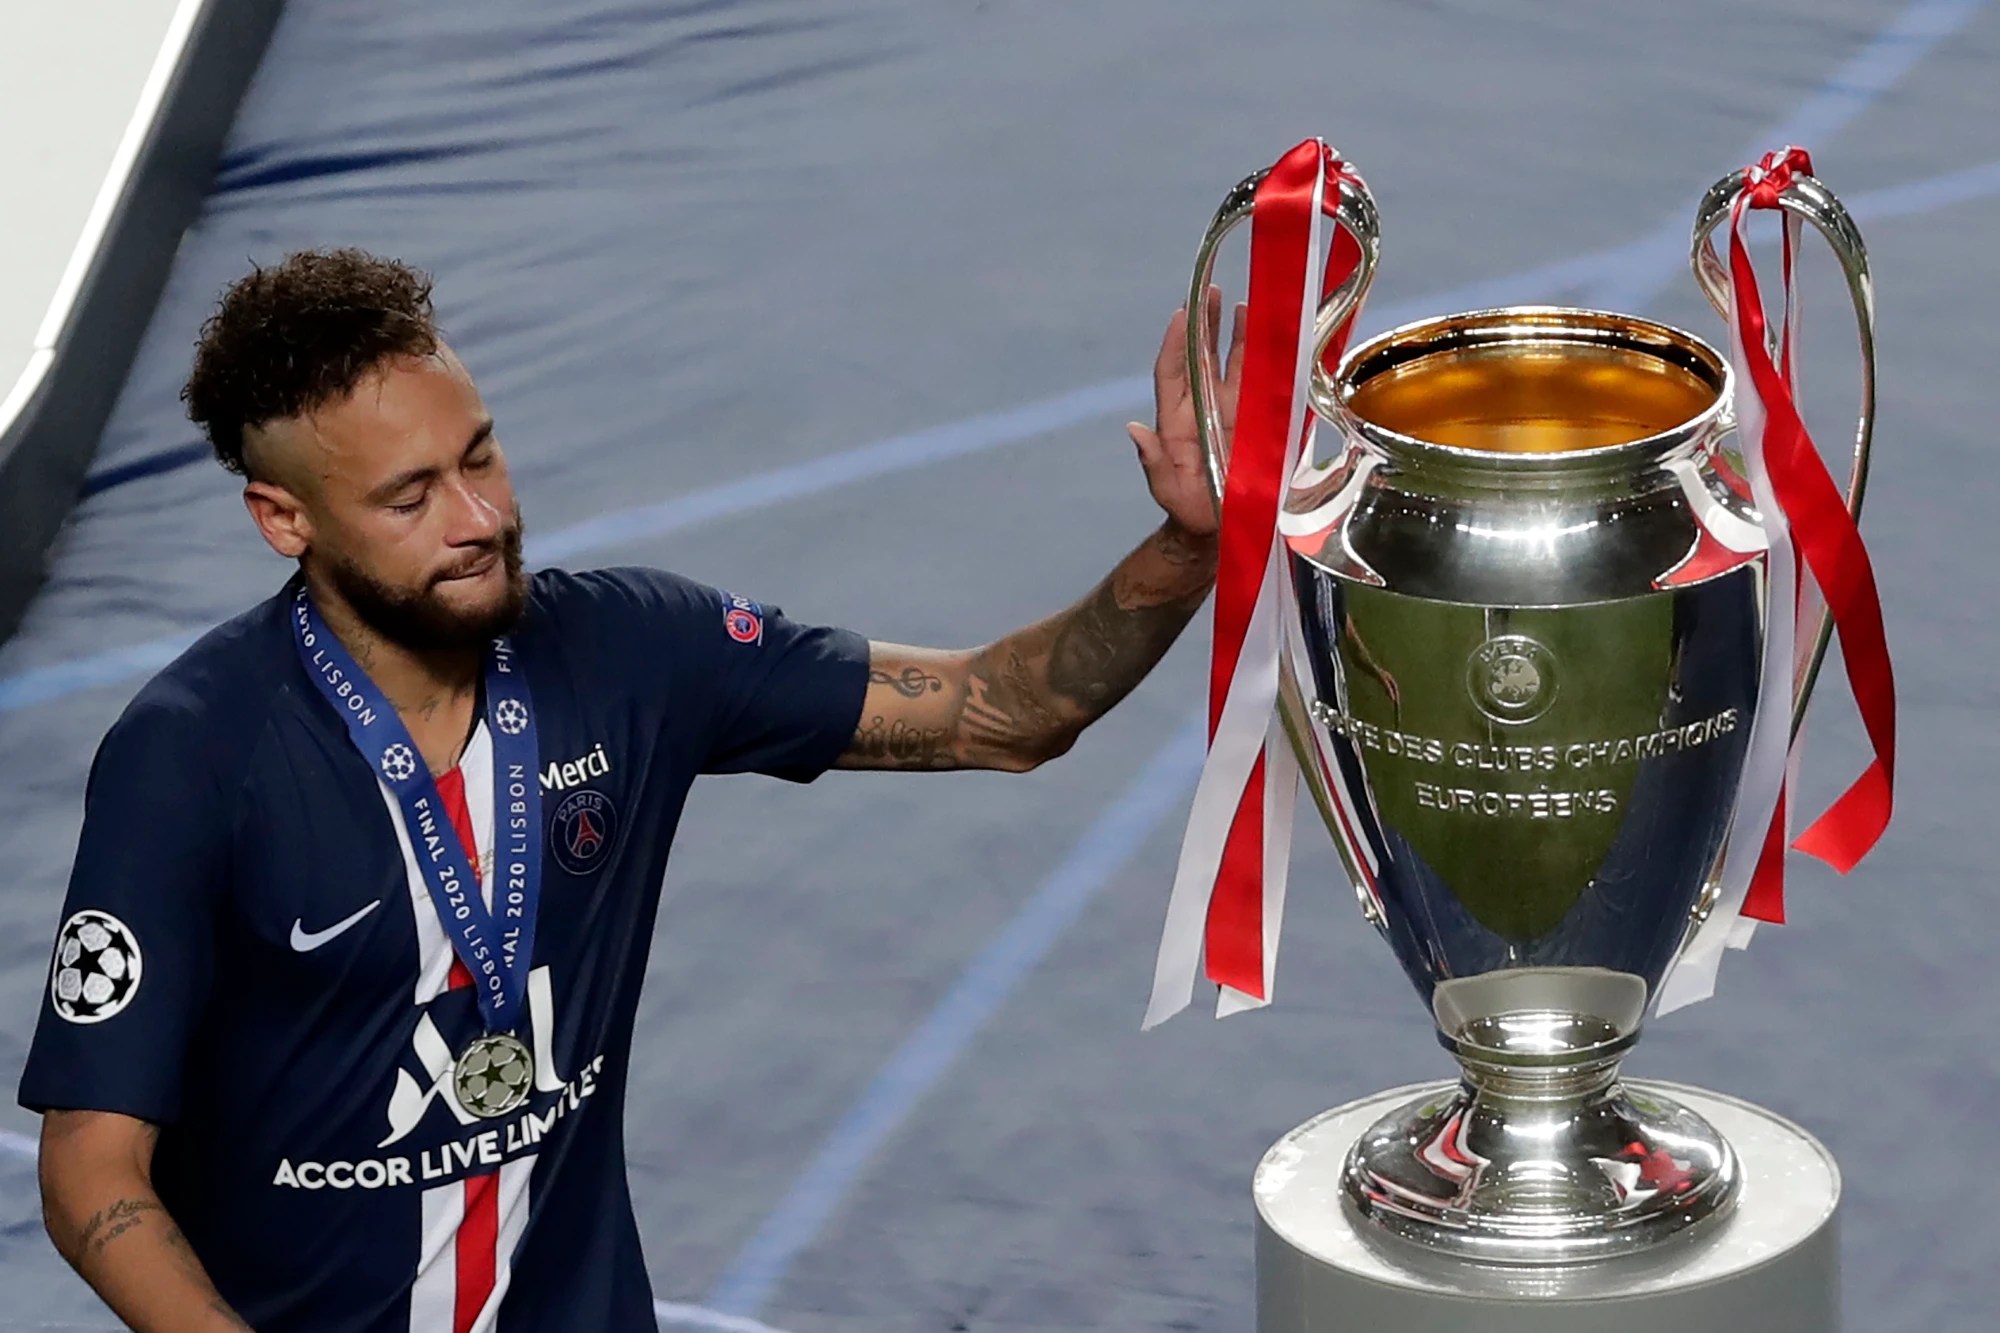 Neymar at PSG: Paris Saint-Germain owners ‘SICK and frustrated’ of Neymar, feel CHEATED of their £200m investment on the Brazilian playmaker – Reports